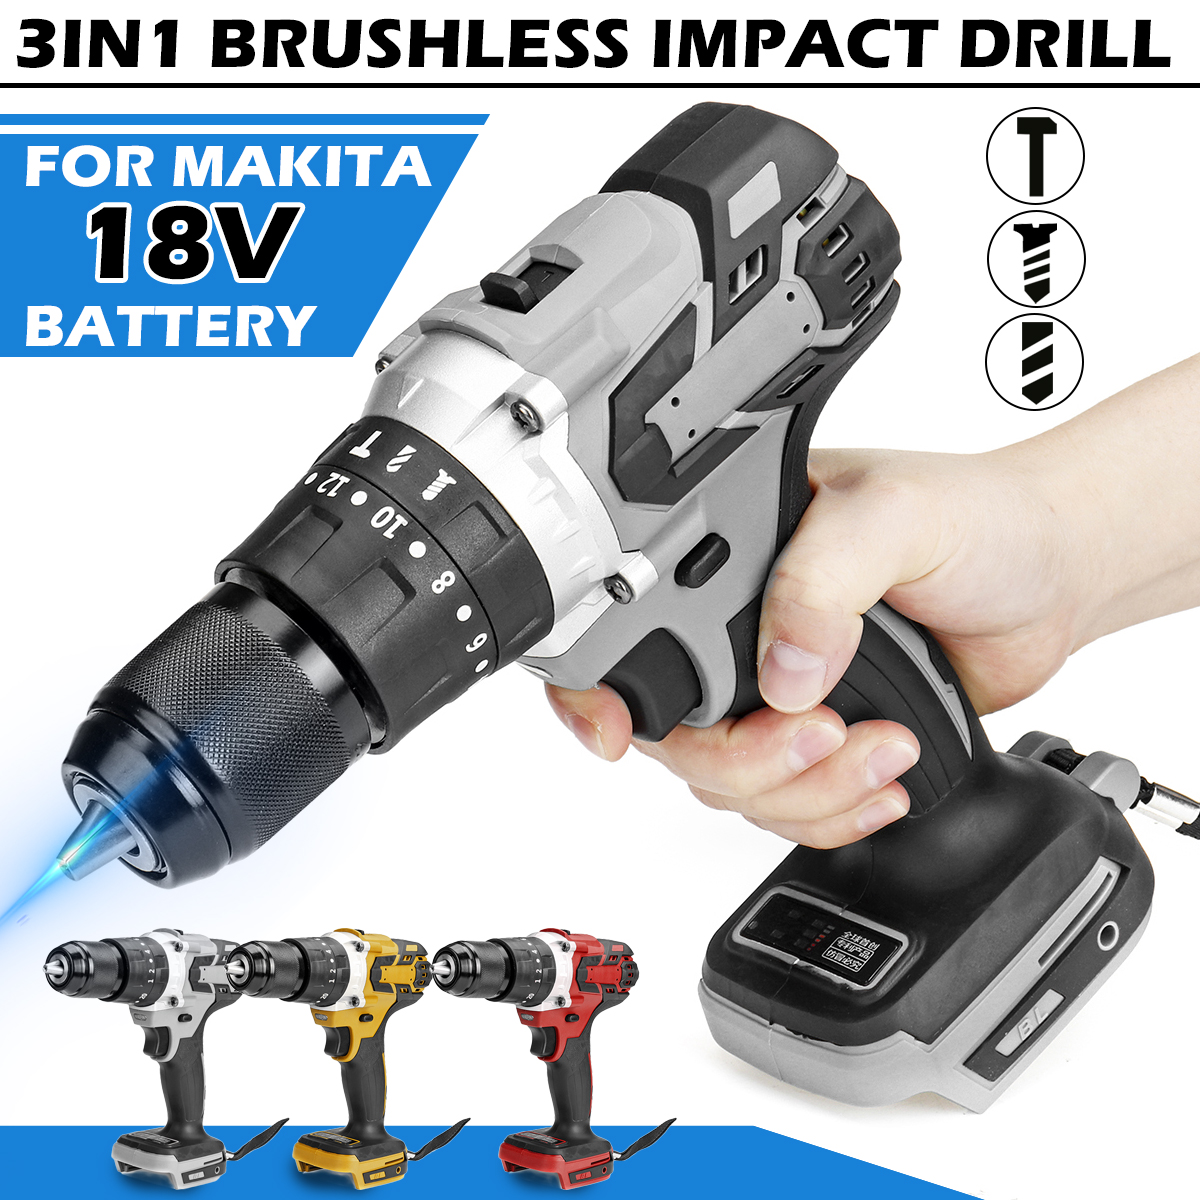 13mm-3-In-1-Brushless-Impact-Drill-Hammer-Cordless-Elctric-Hammer-Drill-Adapted-To-18V-Makita-Batter-1715080-5